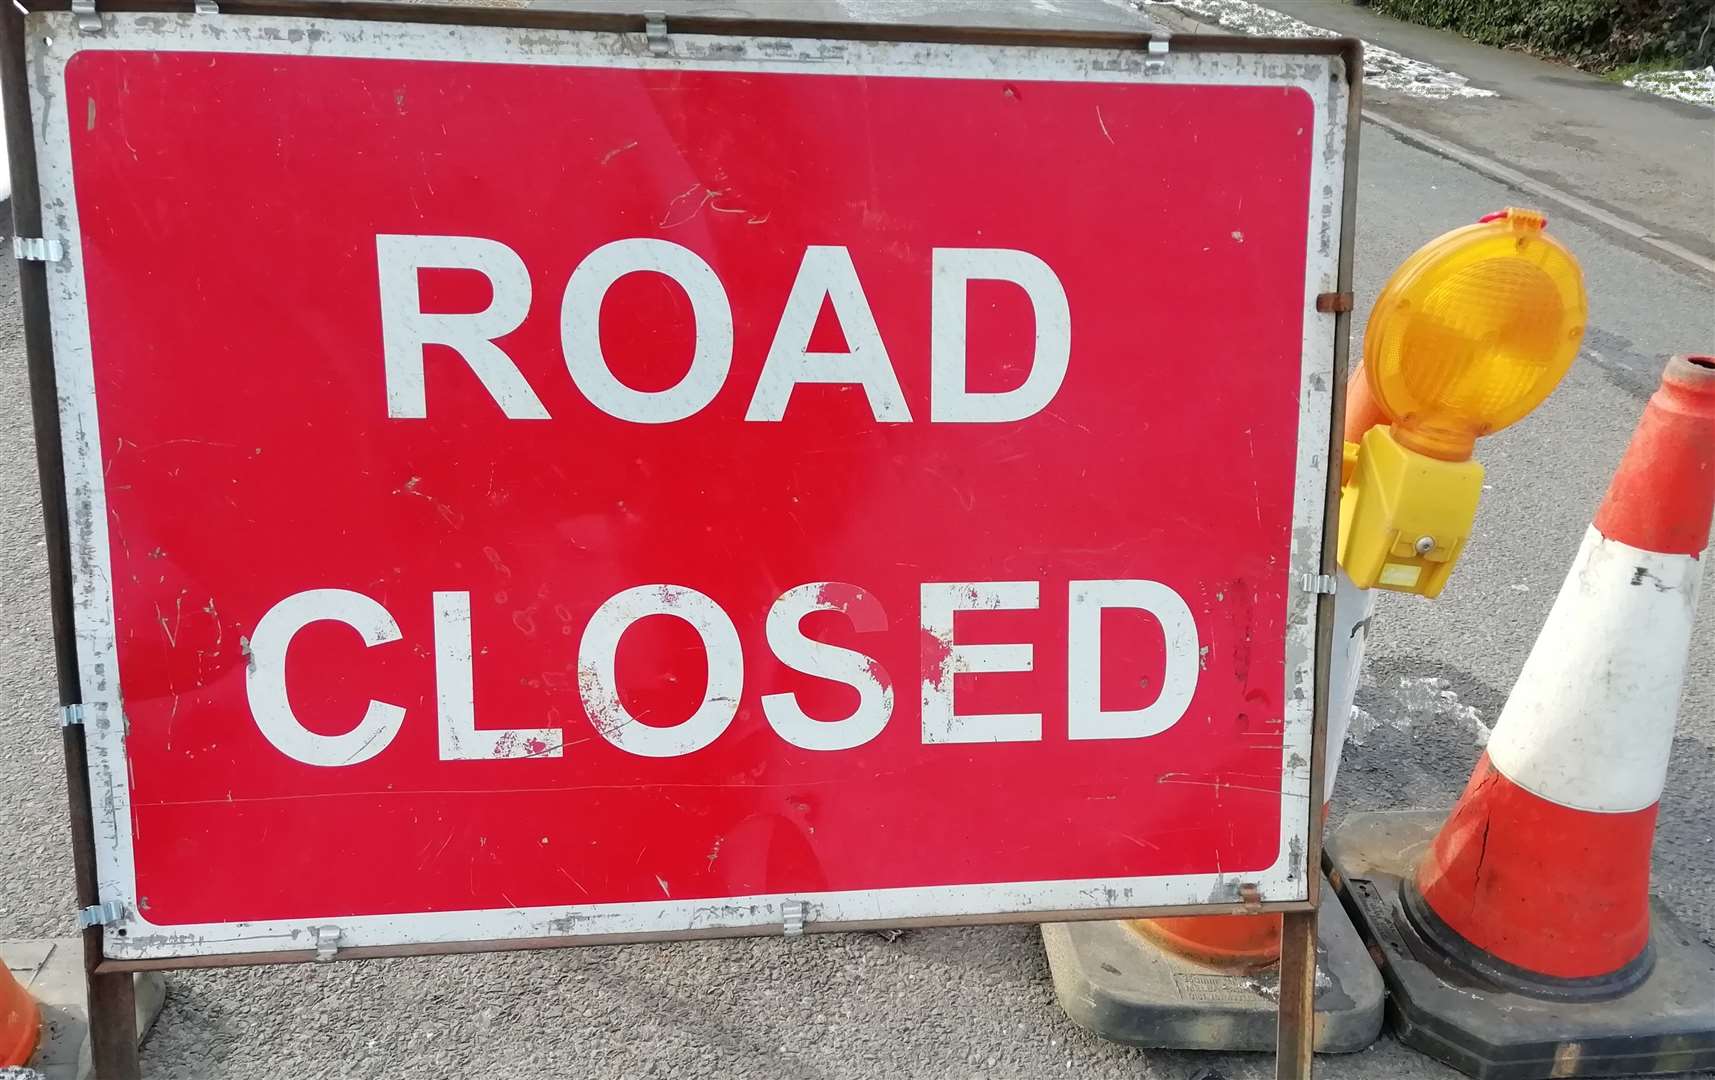 Plough Road will be closed for three days